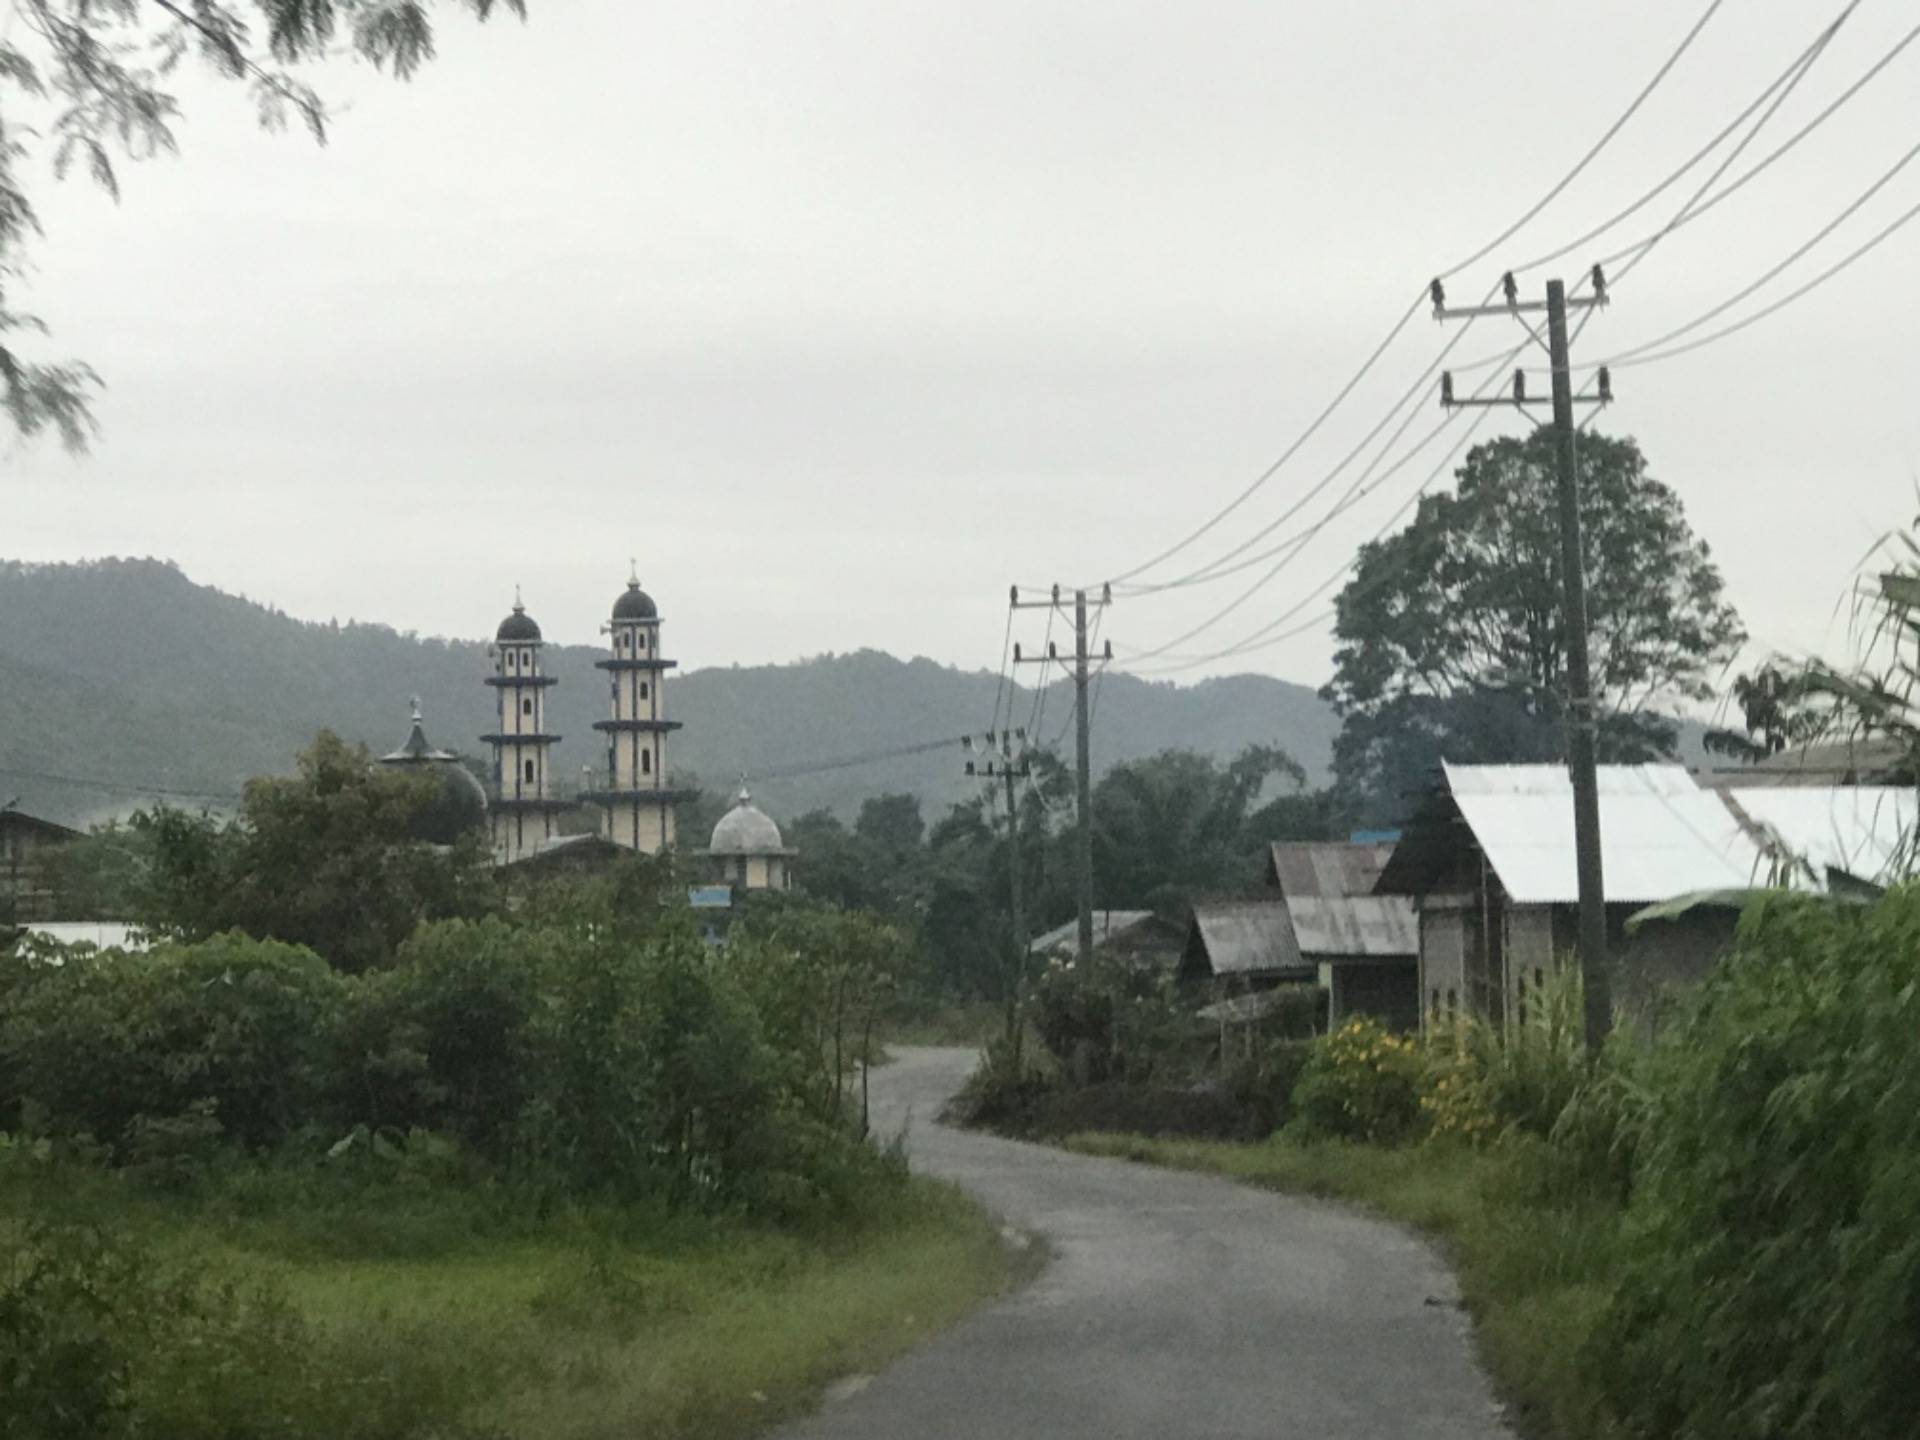 The Rainy Gloomy Morning in Gayo Highlands of Aceh Province